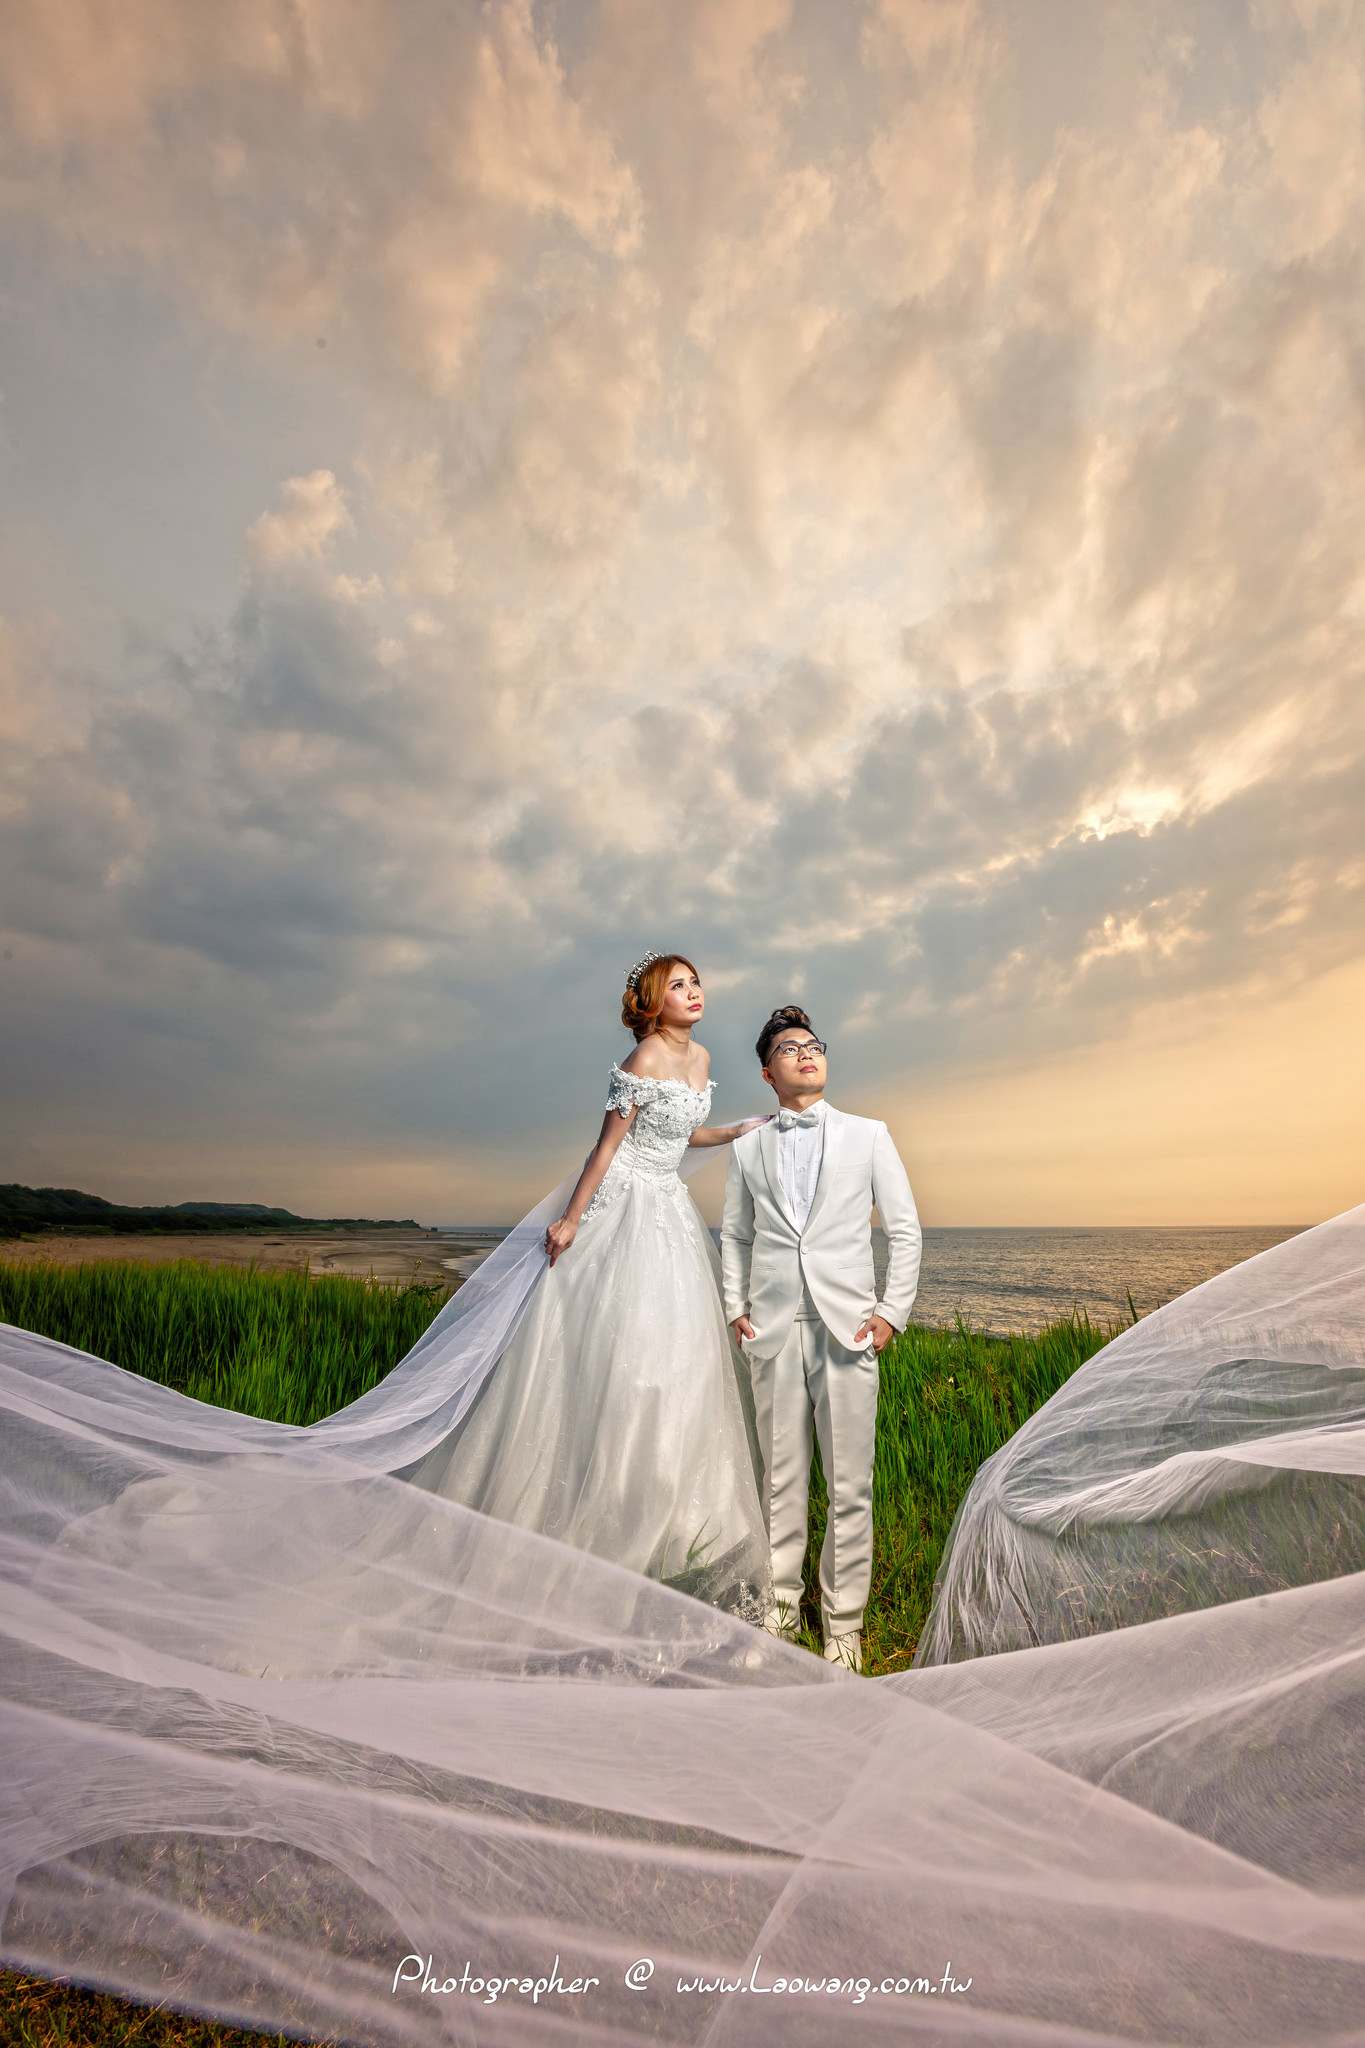 wedding photography17 The Best Wedding Photography Ideas by Lao Wang